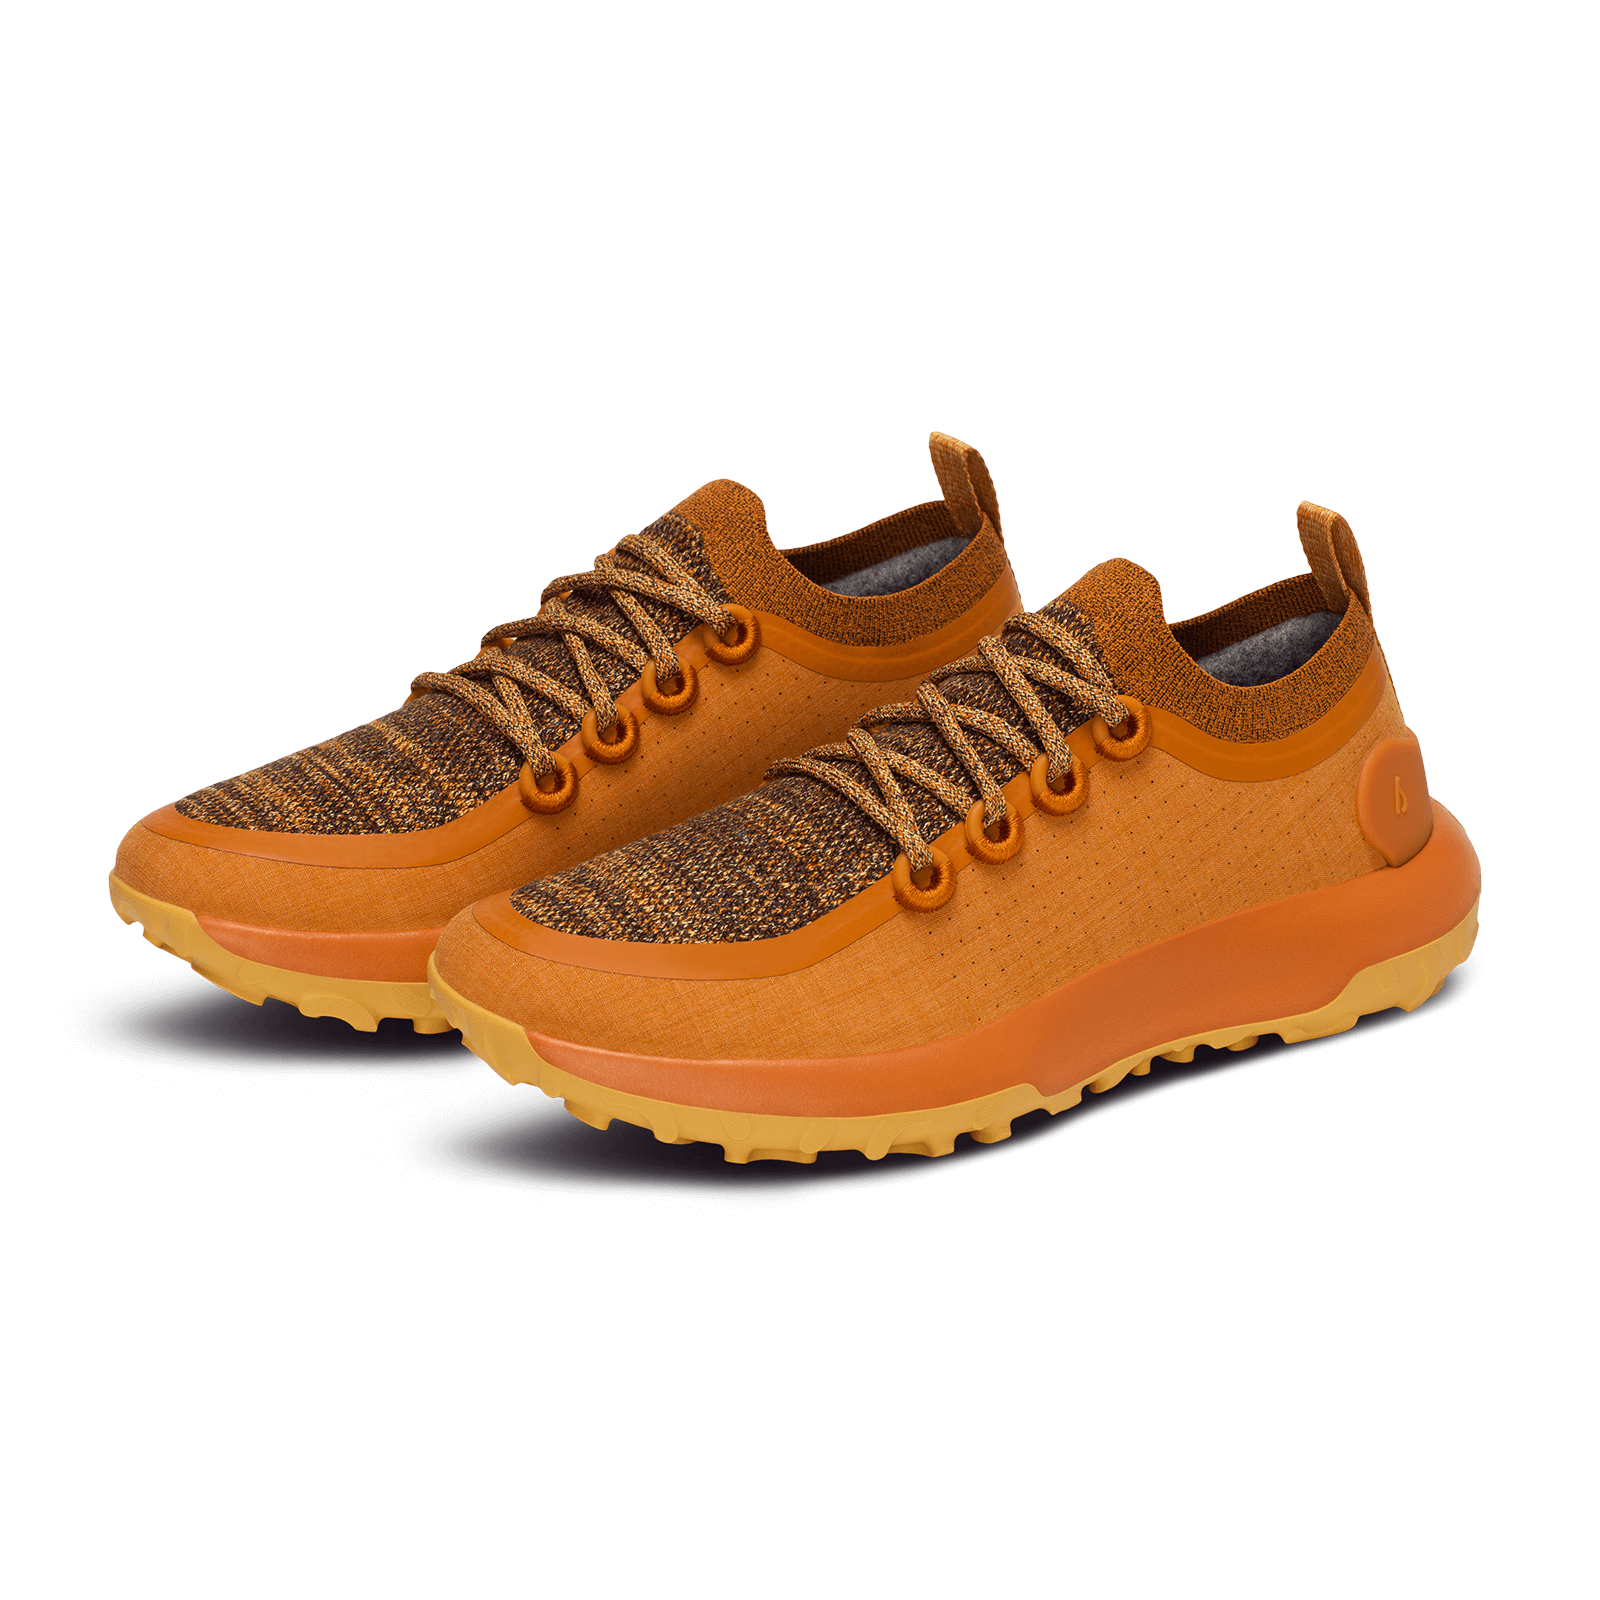 Men's Trail Runners SWT - Honey Rust (Forage Tan Sole)